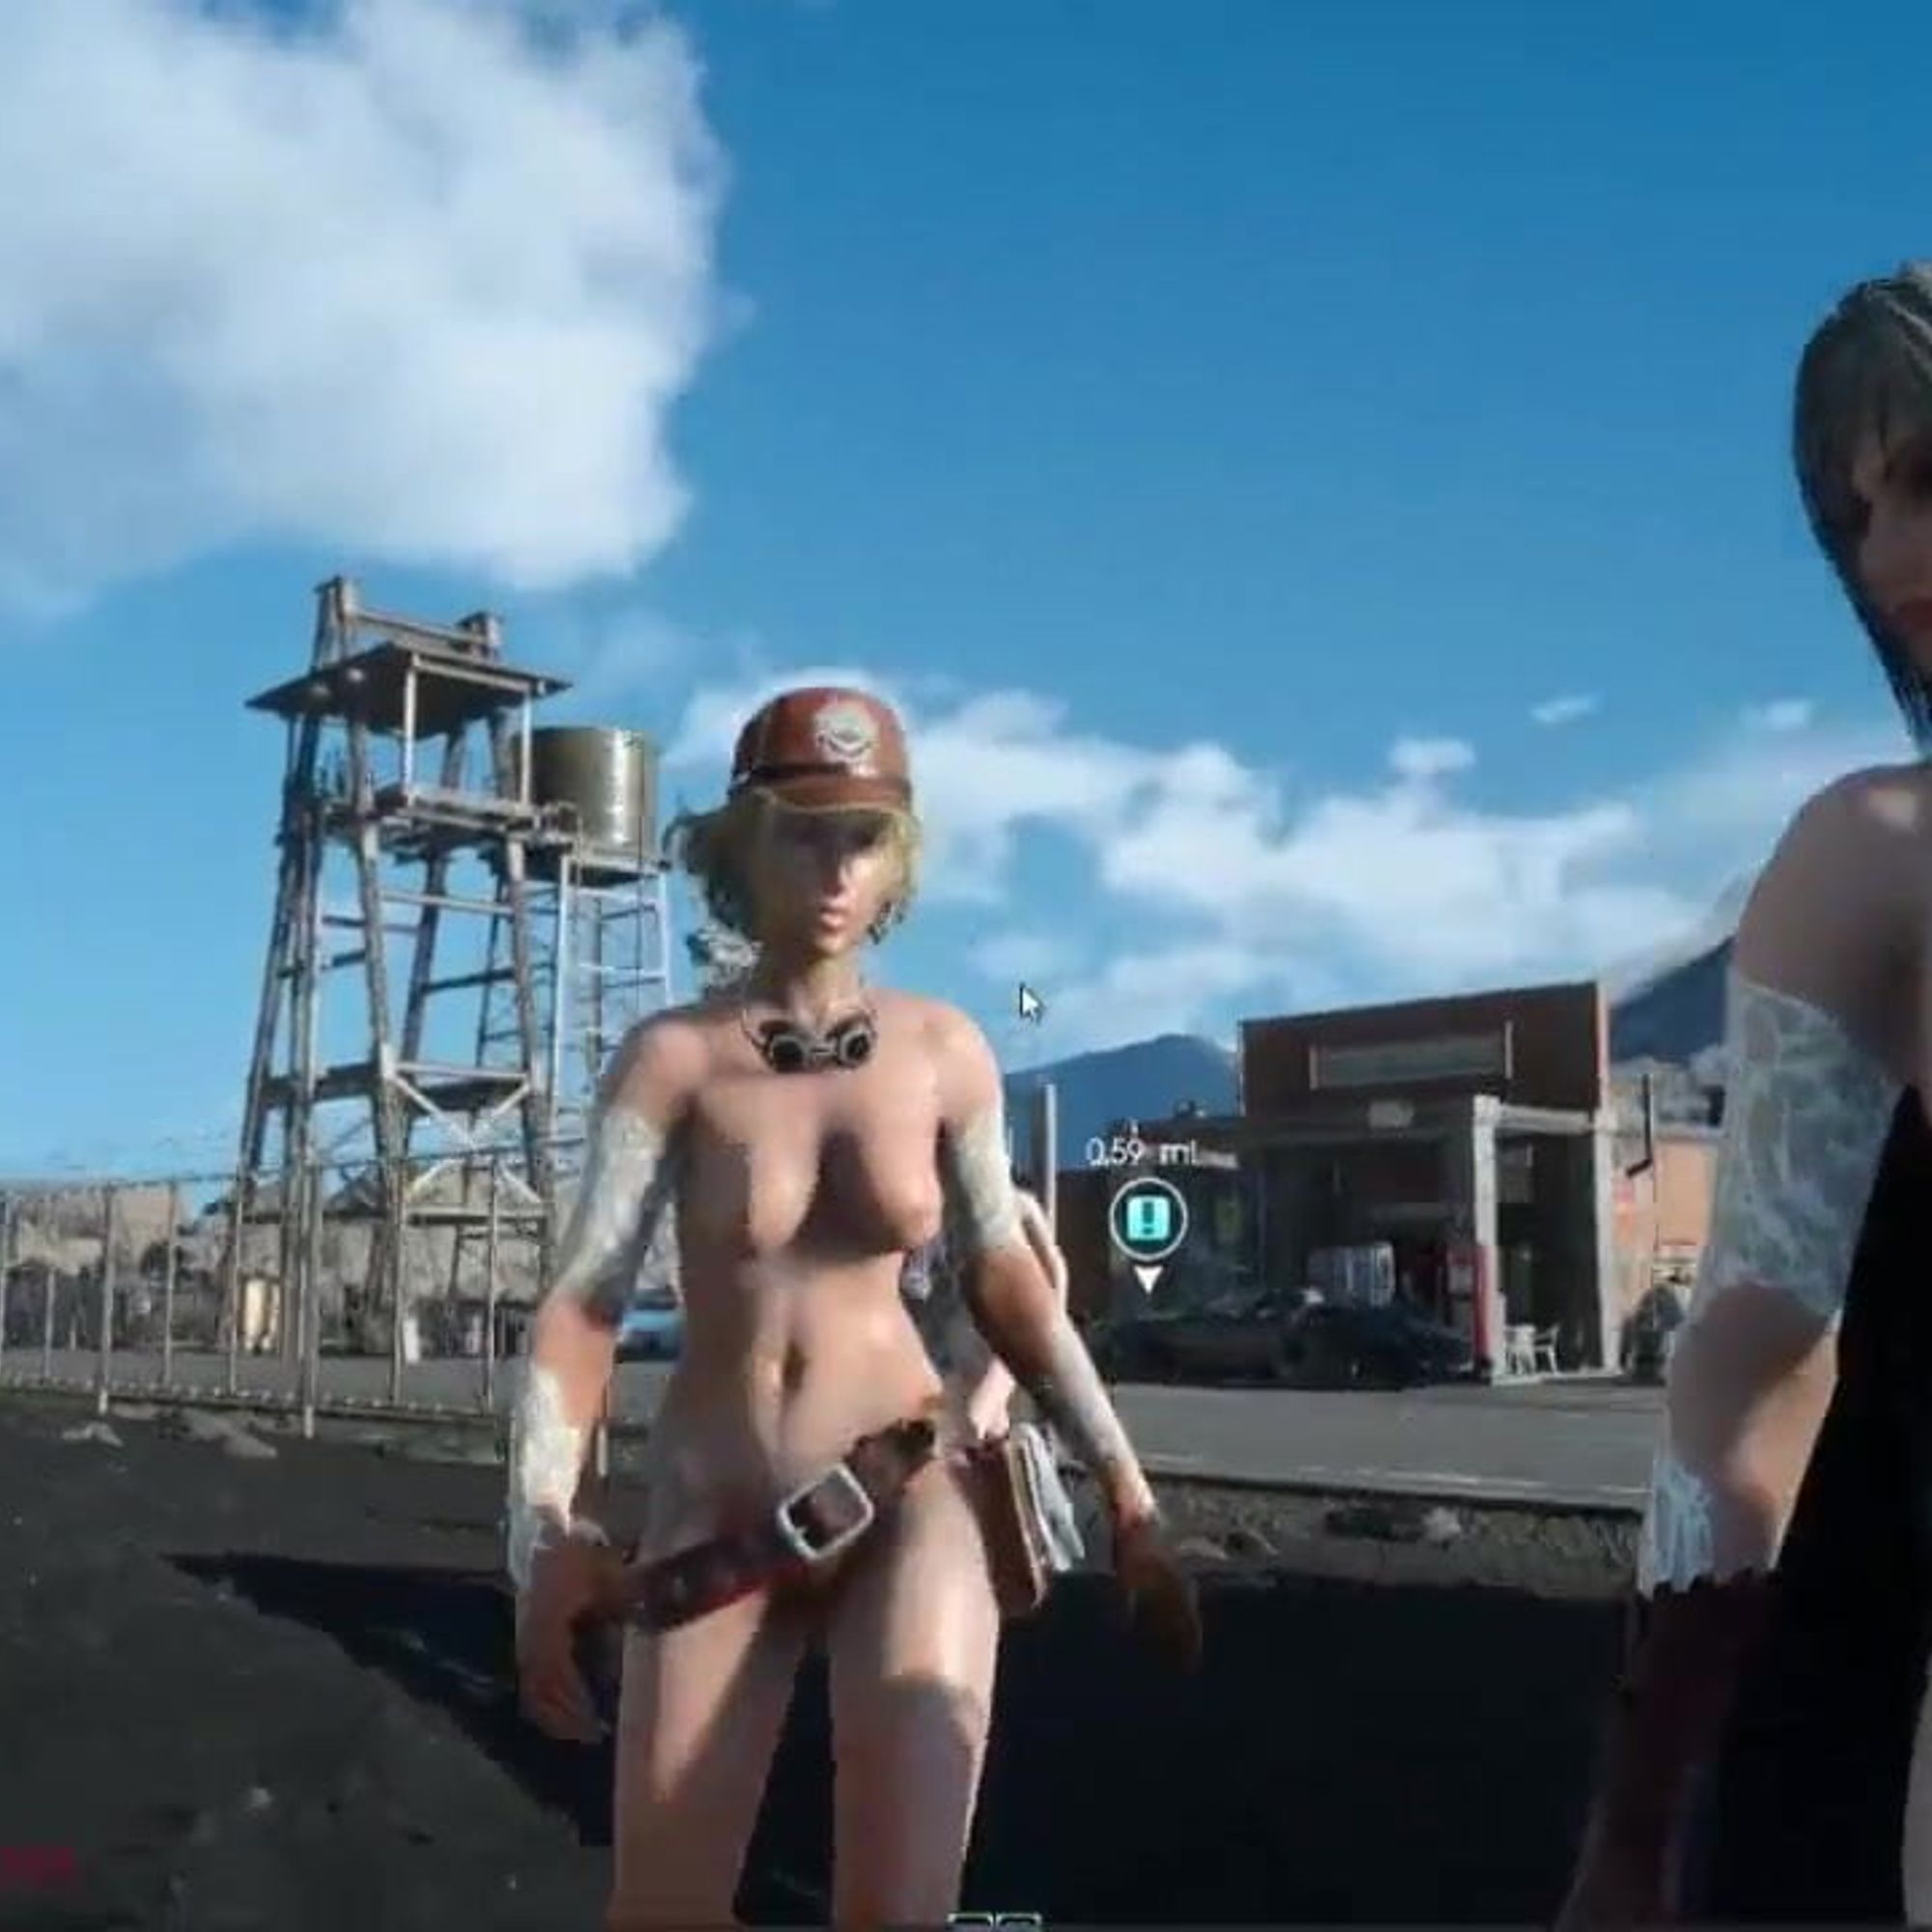 Watch Final Fantasy Xv Nude Mod Download video on xHamster, the biggest HD ...